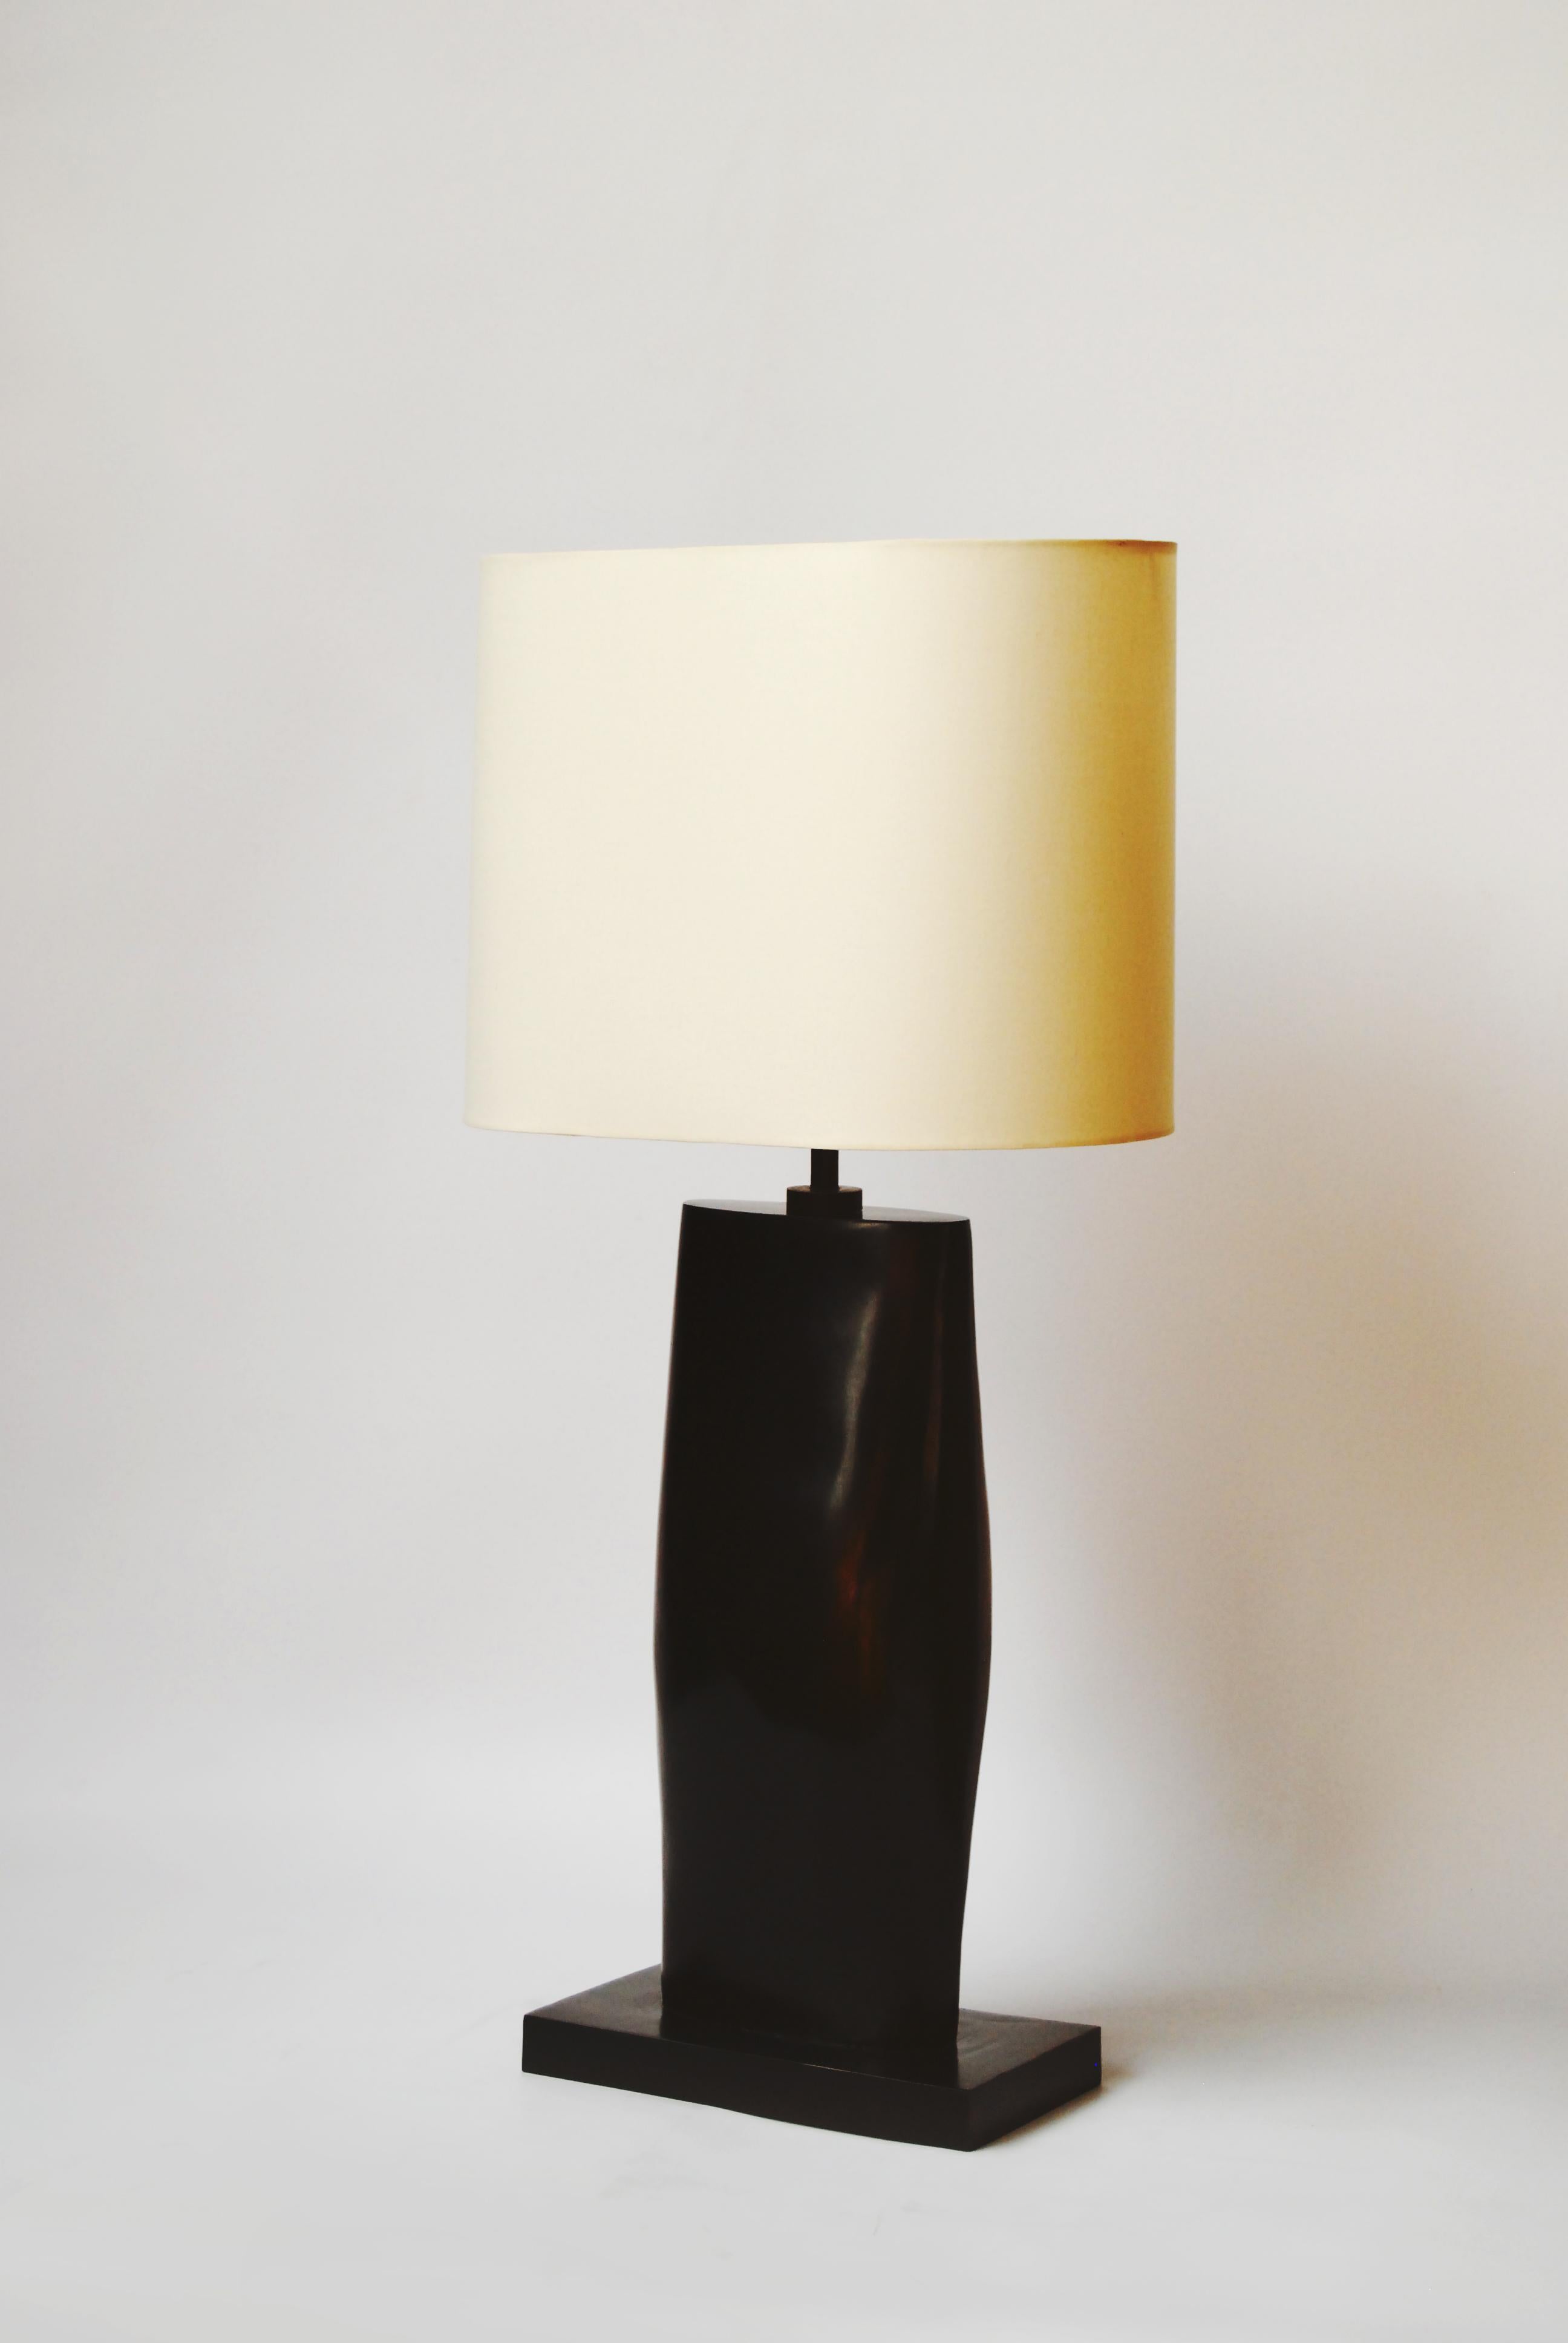 Nick Lamp in Cast Bronze from Elan Atelier

The Nick lamp is cast in solid bronze using the lost wax method. Shown in our dark bronze finish with linen shade. Custom sizes and finishes are available.

Dimensions/
w 16.5 x d 9.4 x h 29.5 in
w 42 x d